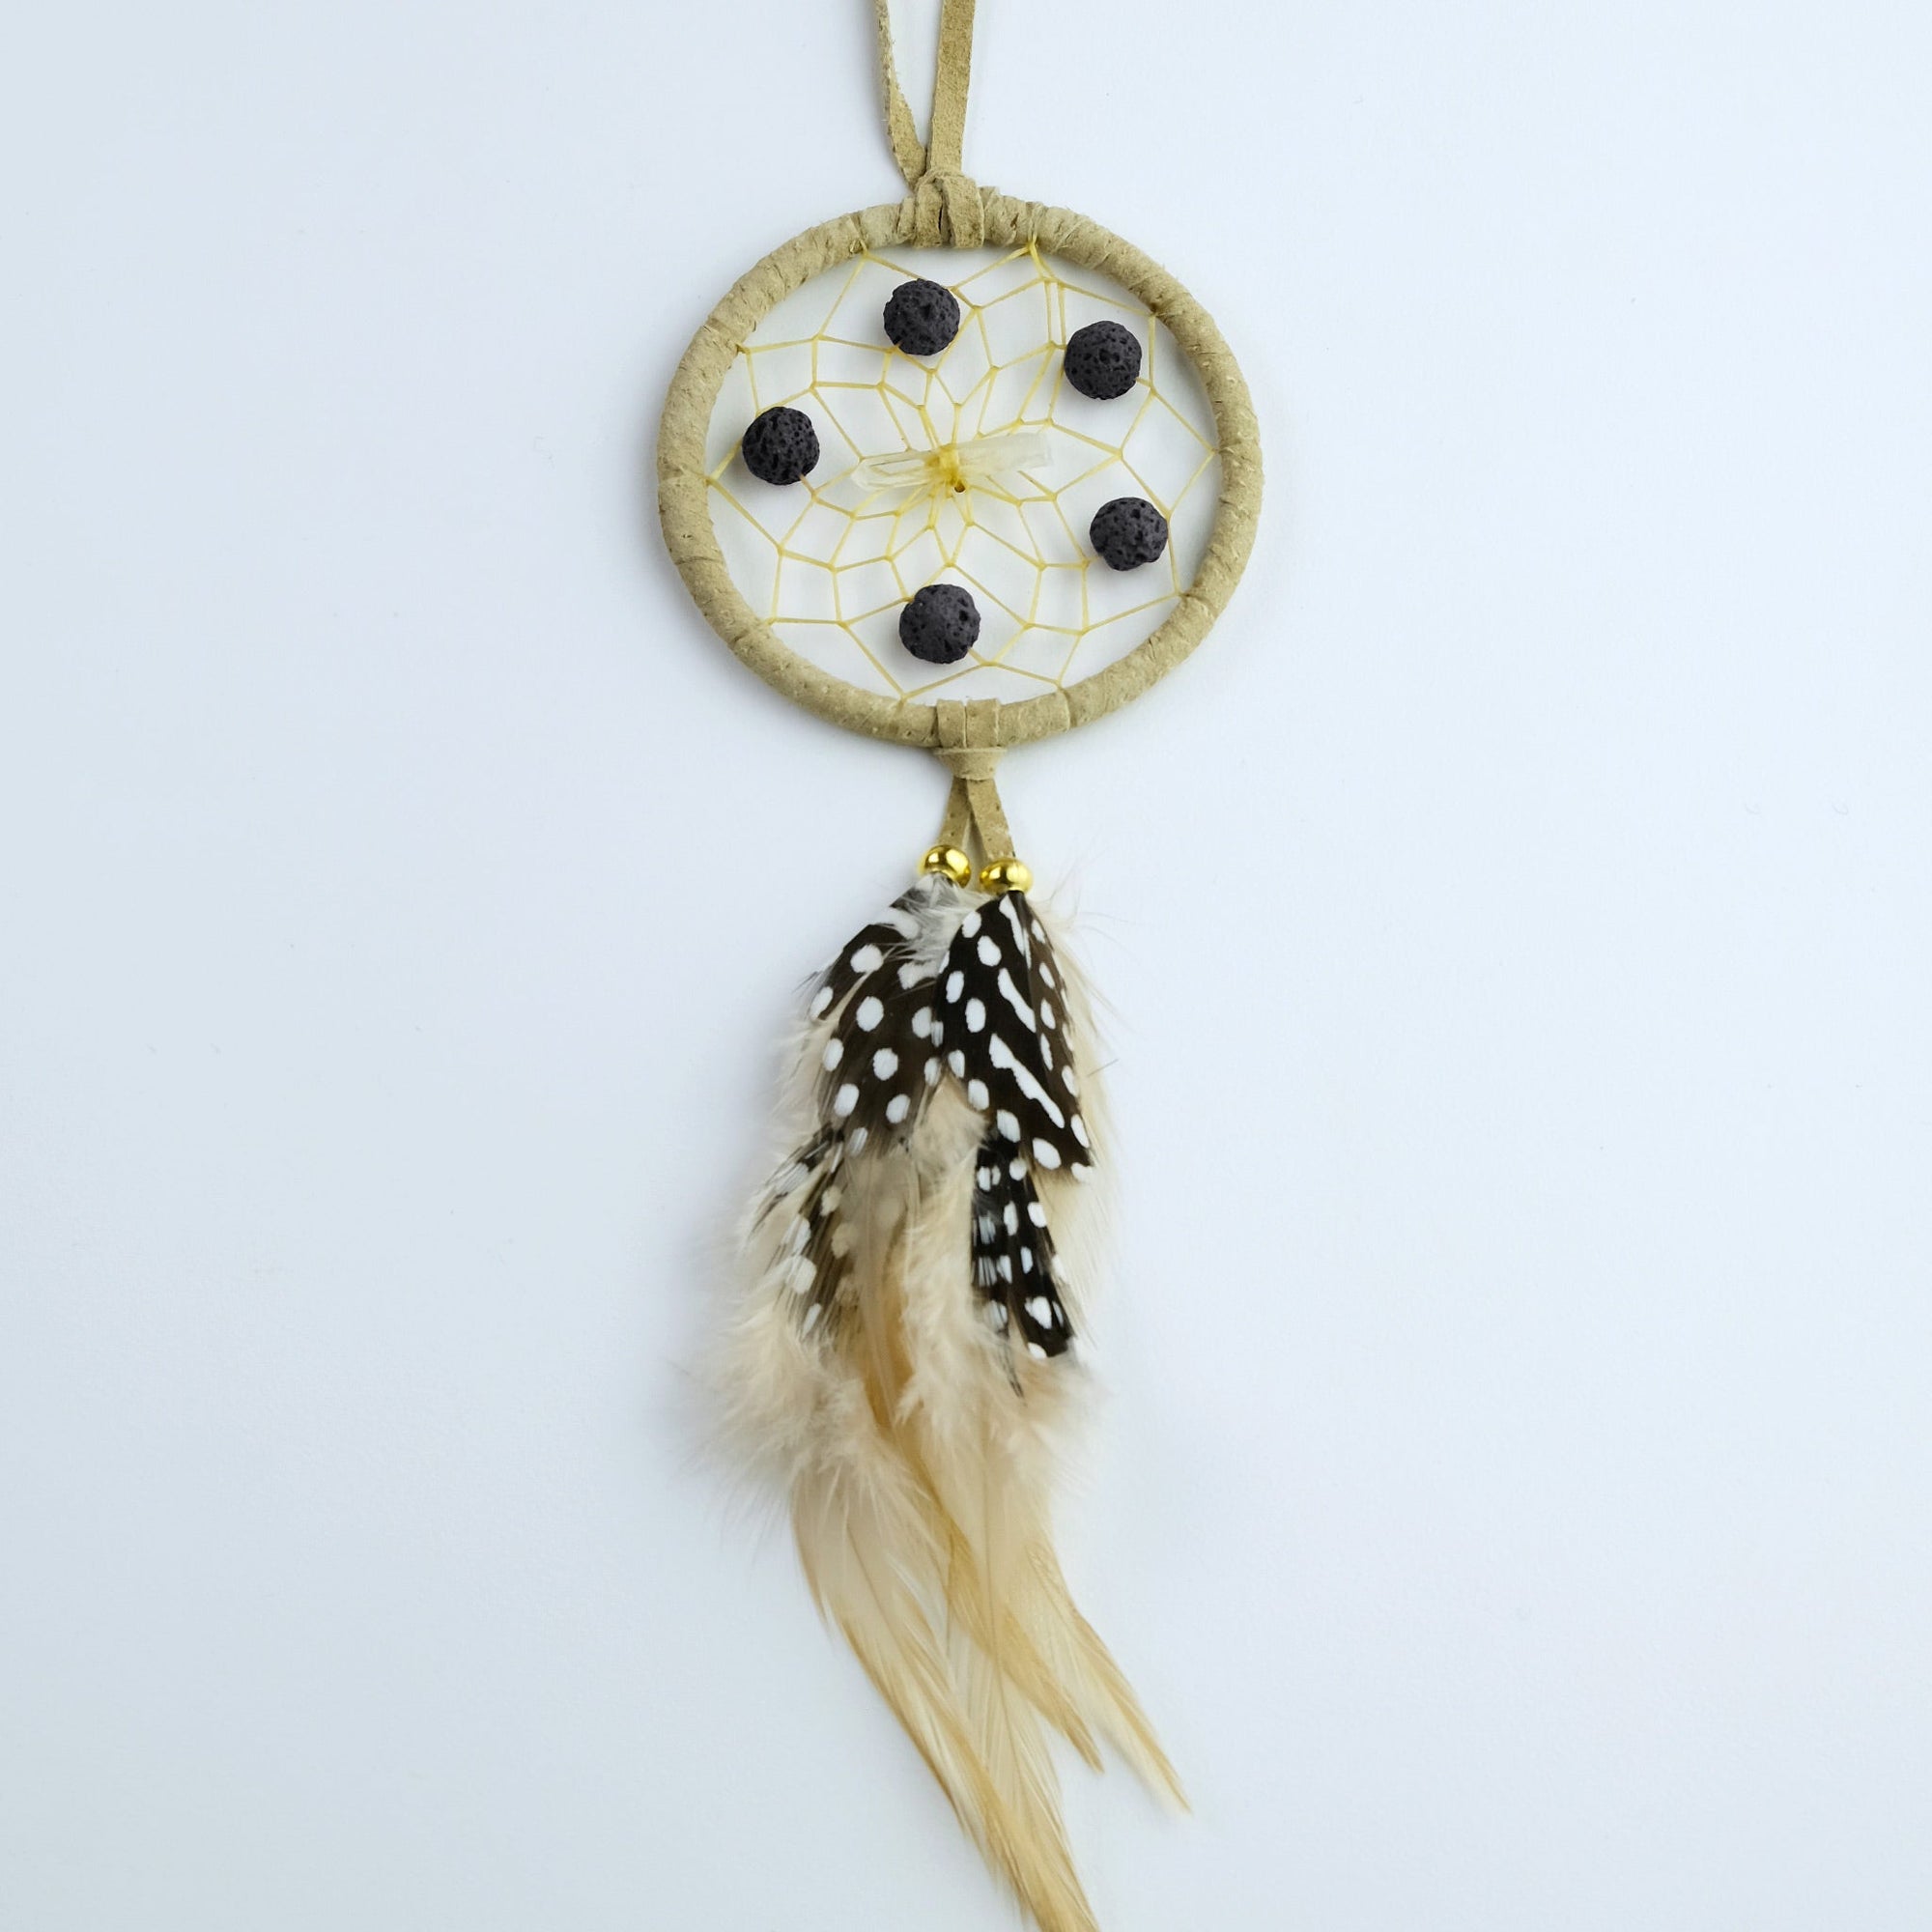 2.5" / 3" Aromatic Dream Catchers detailed with semi-precious Lava Stone Beads Assorted Colours